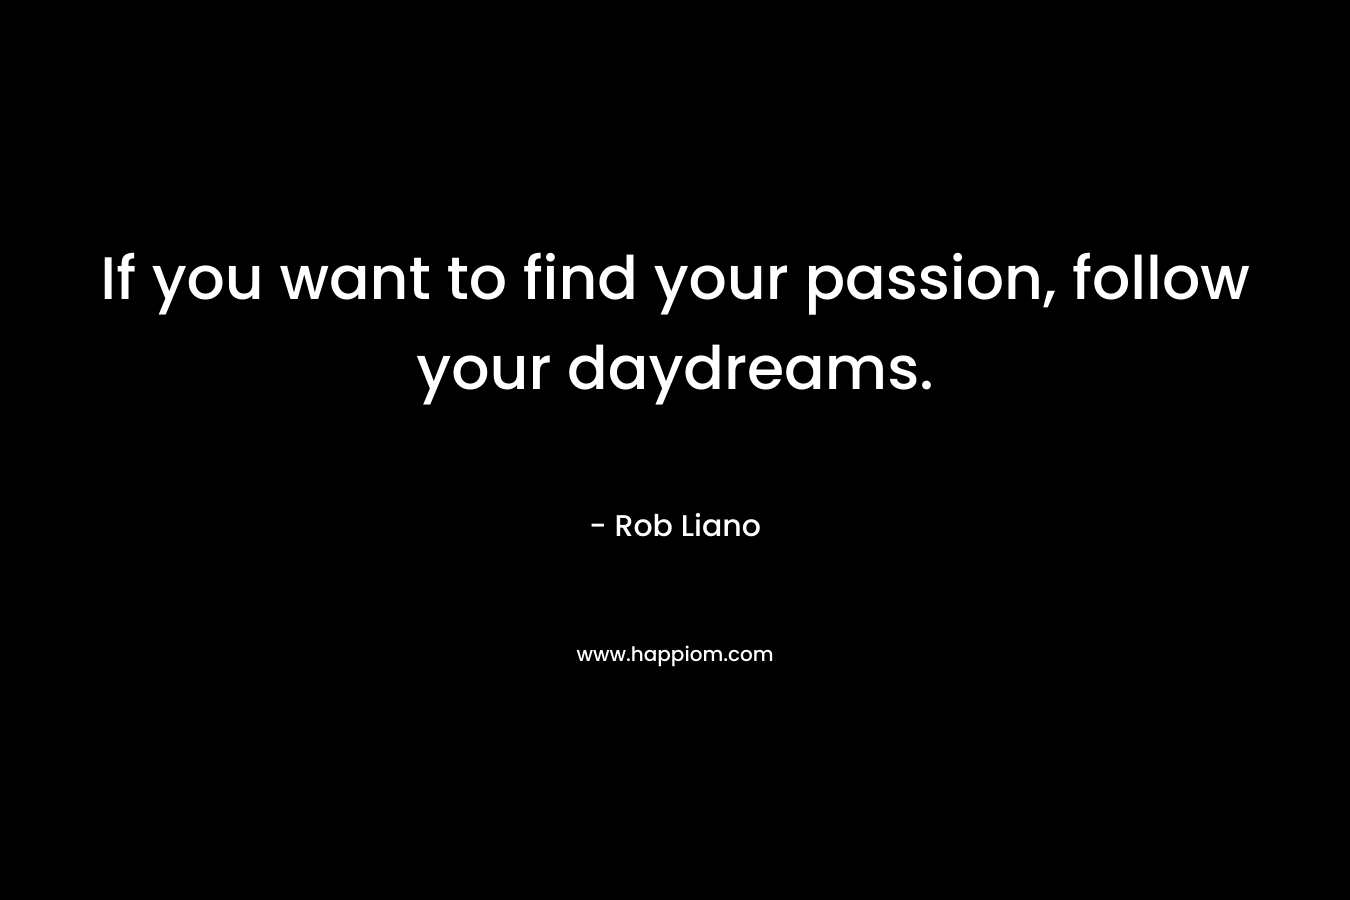 If you want to find your passion, follow your daydreams. – Rob Liano